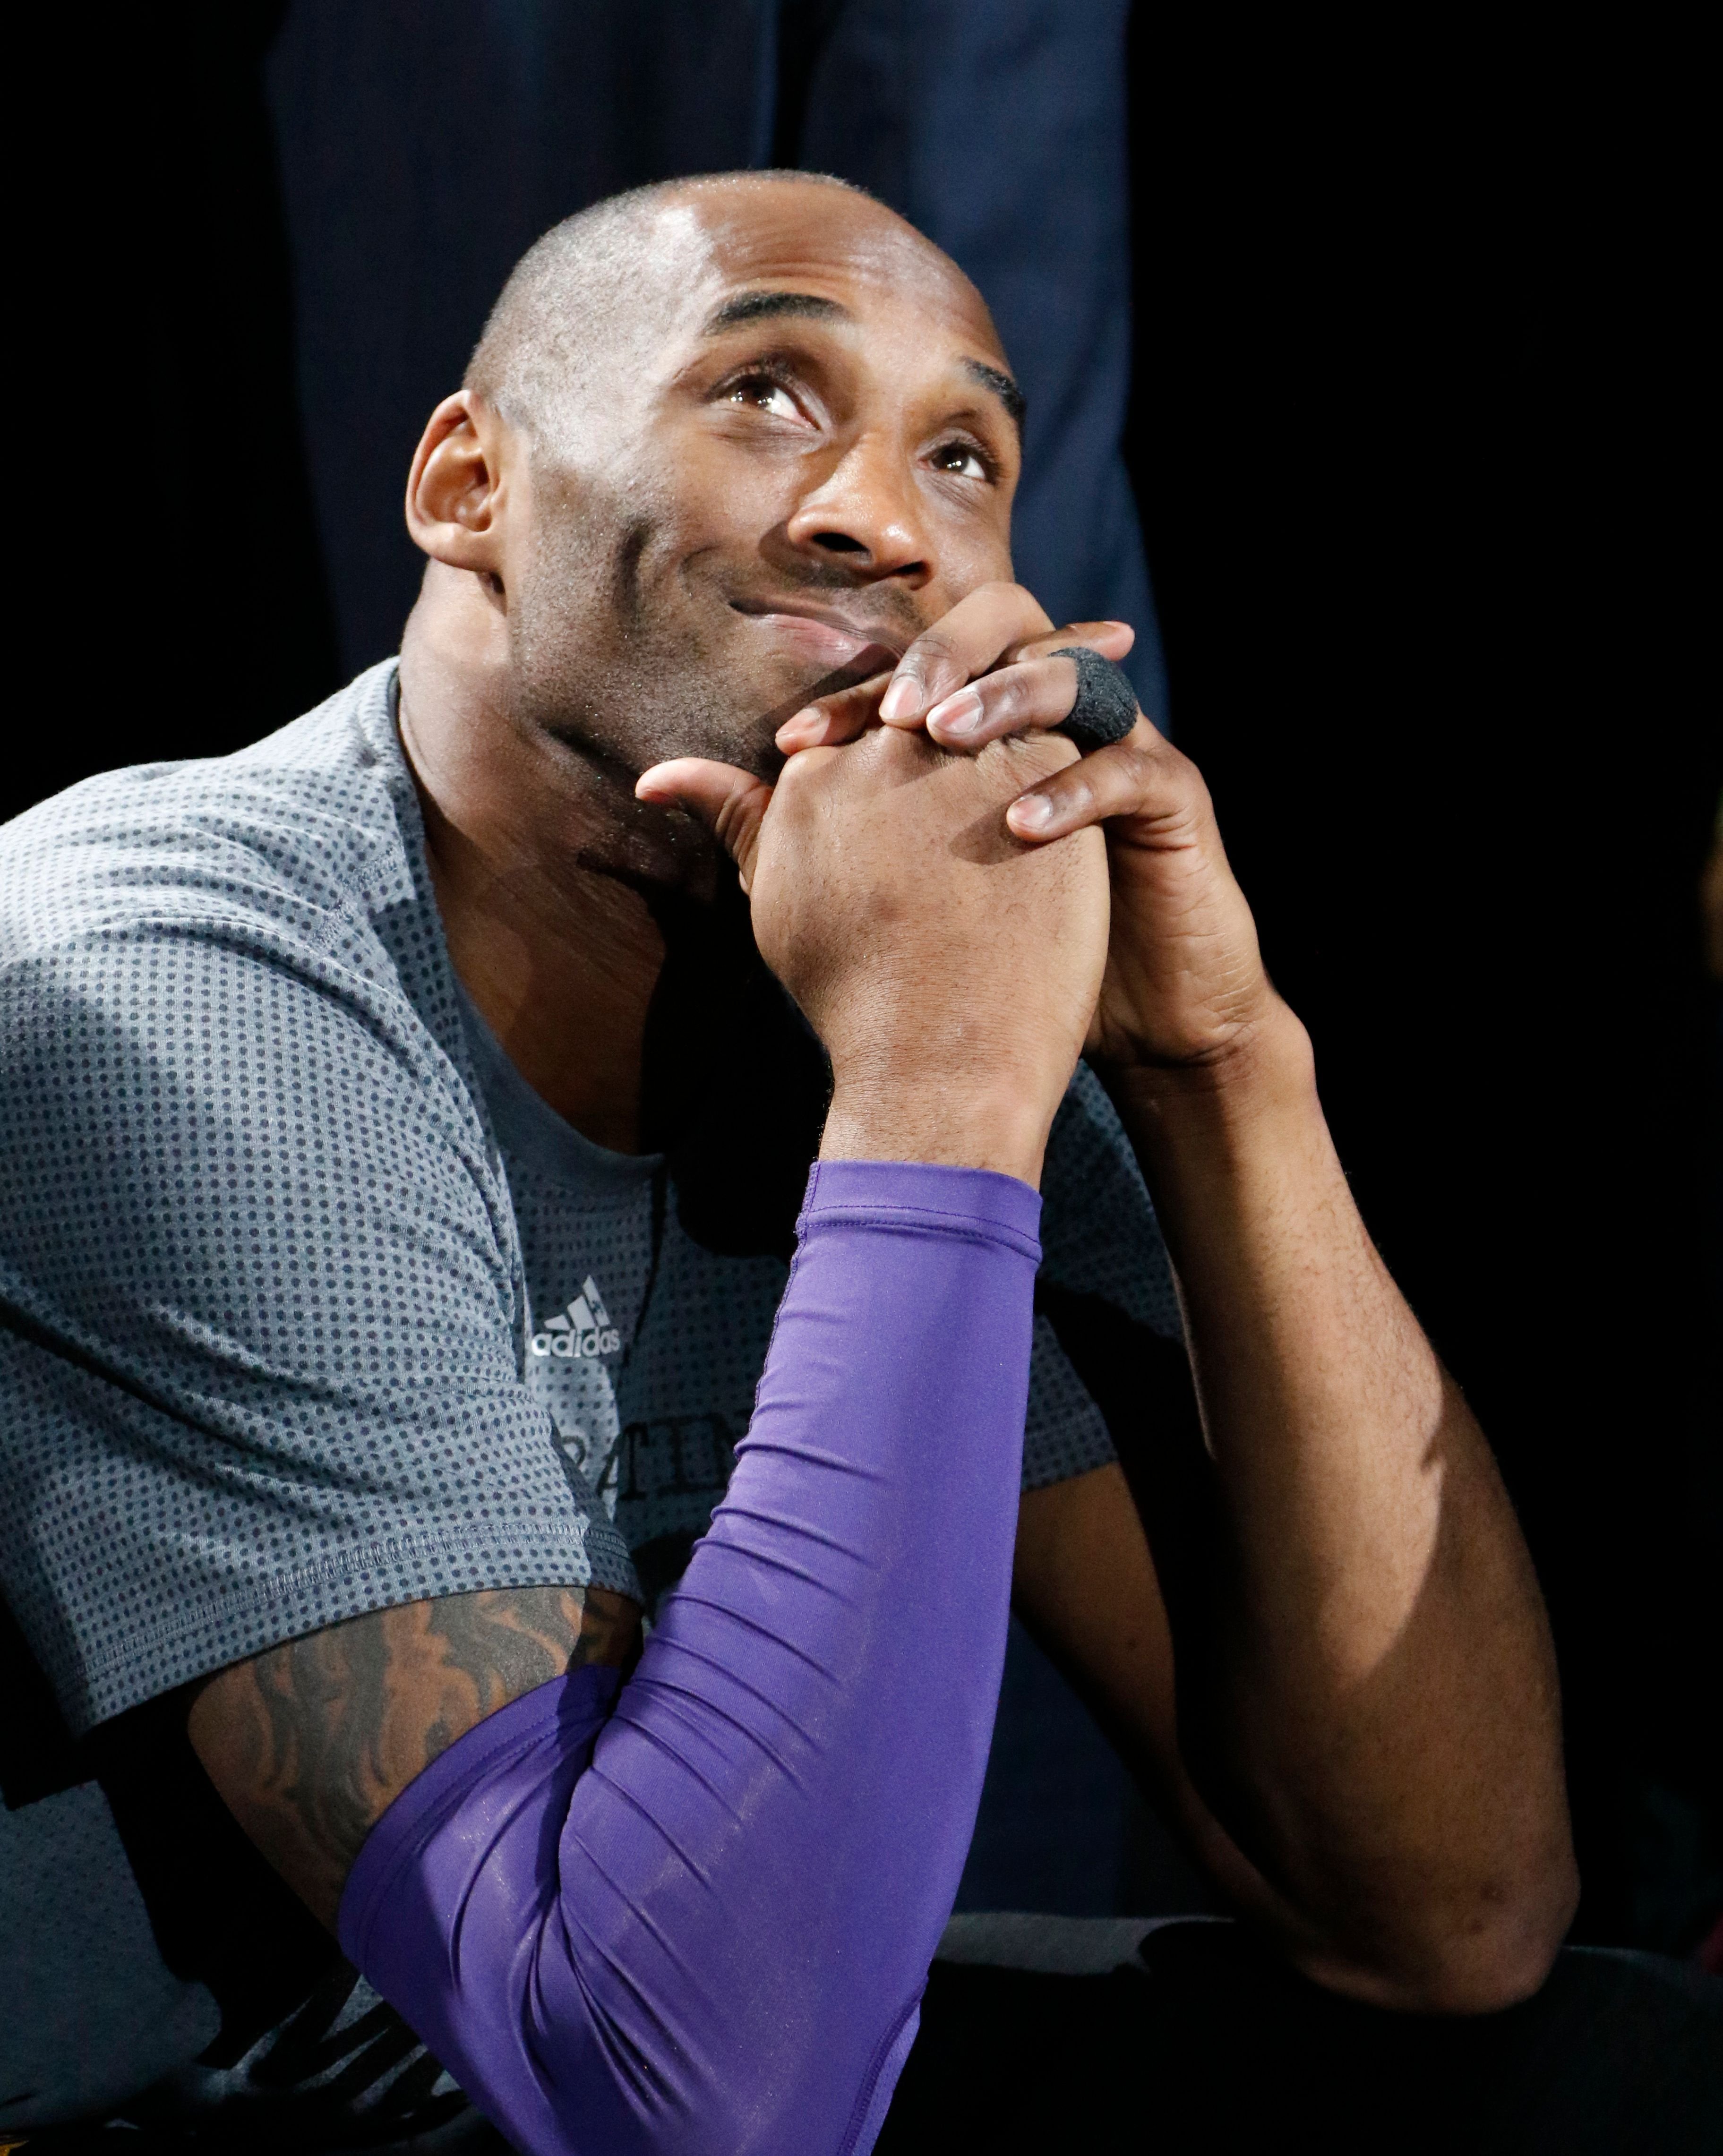 Late Kobe Bryant at AT&T Center on February 6, 2016 in San Antonio, Texas. | Photo: Getty Images